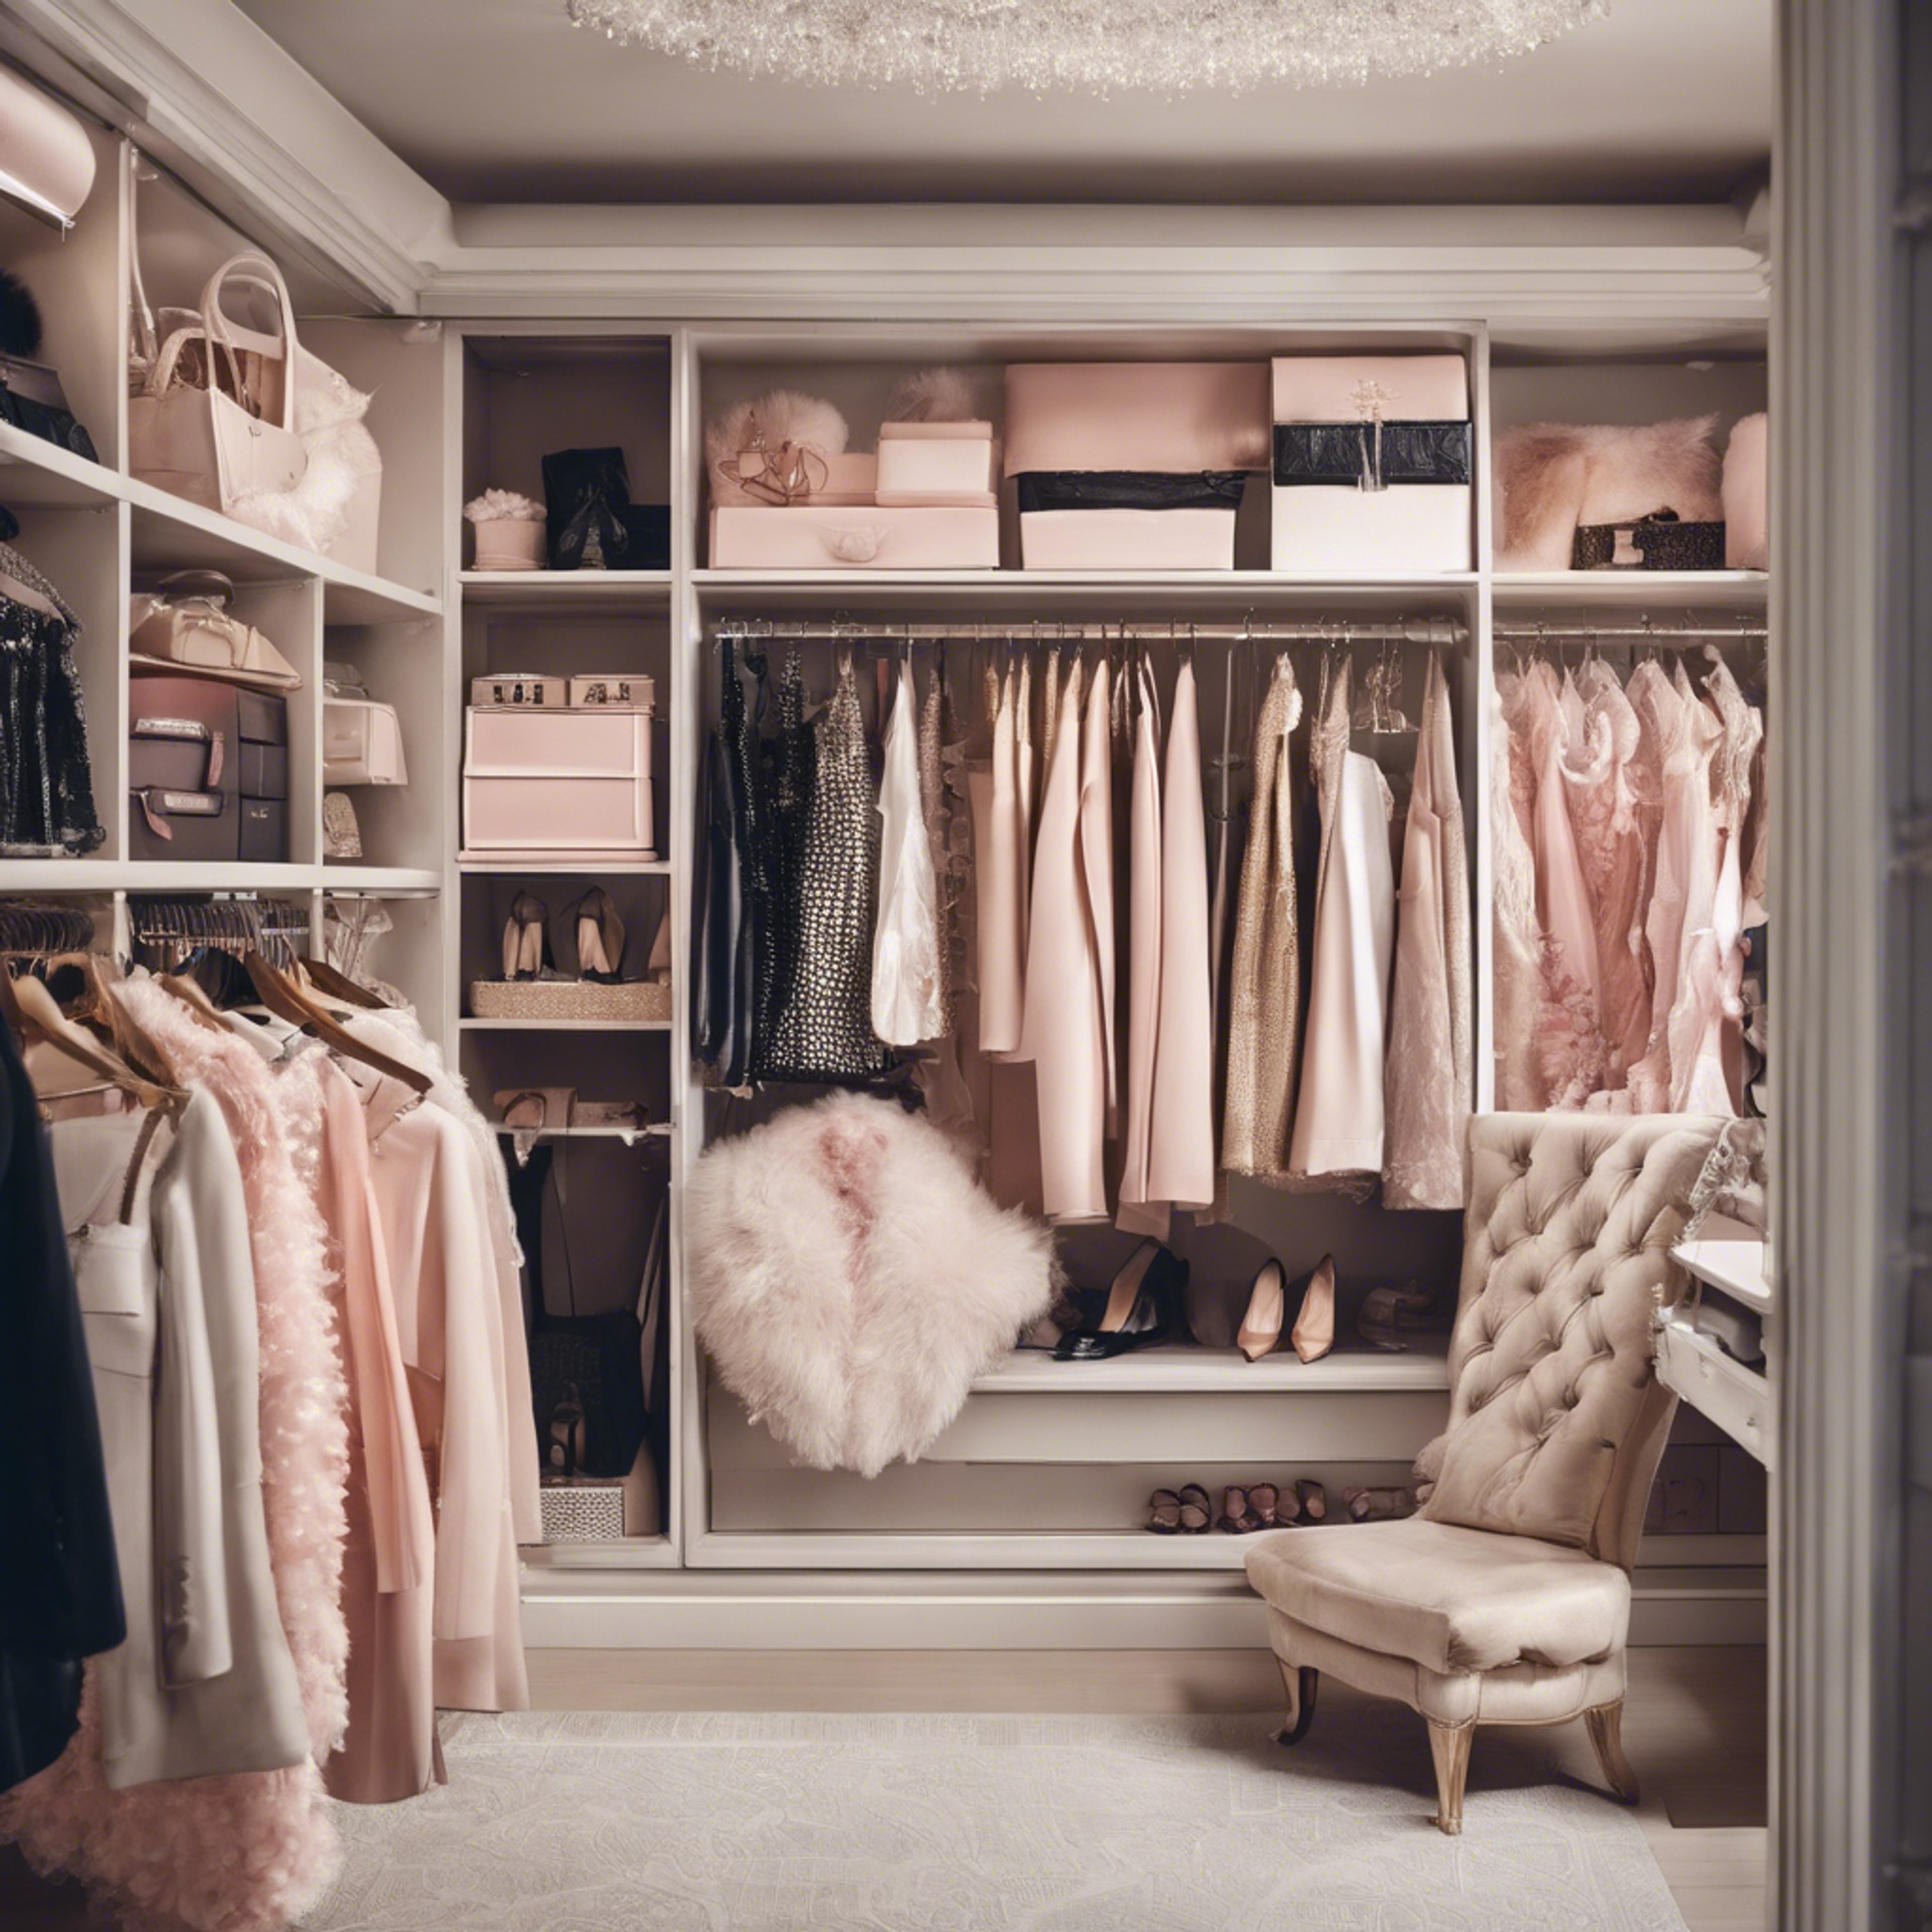 A chic and girly walk-in closet filled with French couture fashion and accessories. Ფონი[8866e00bbc364656a394]